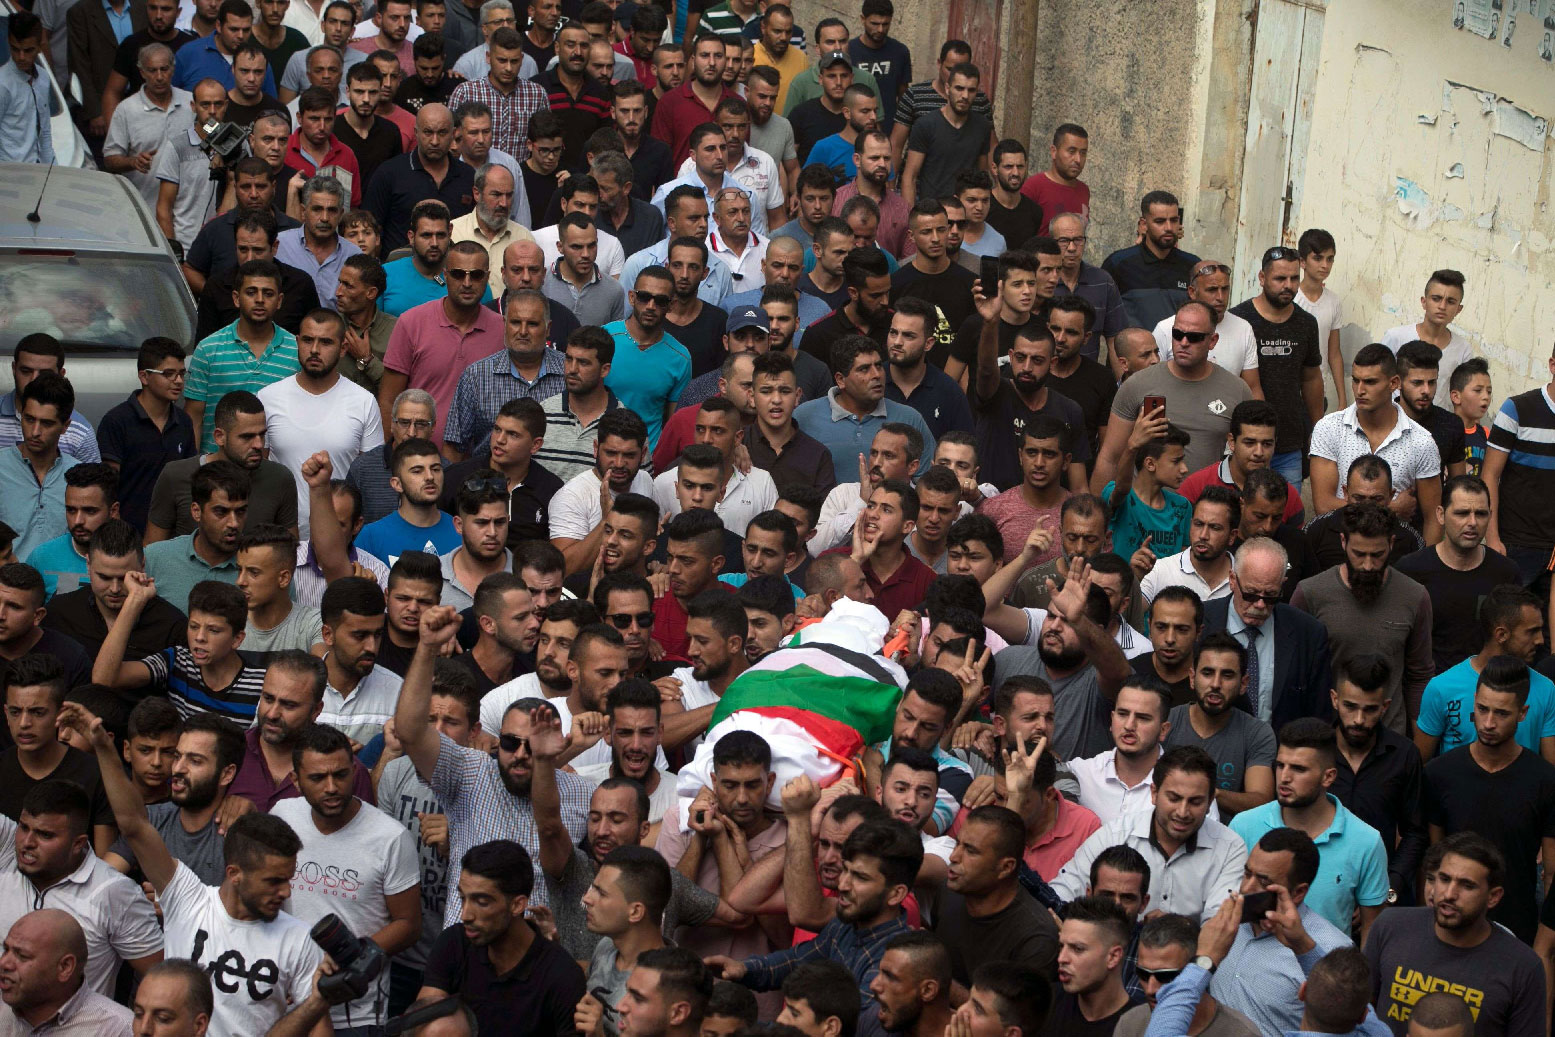 Palestinians carry the body of 48-year-old mother of eight, Aisha Rabi, who died of her wounds after the car she was travelling in with her husband was hit by stones, during her funeral in the West Bank village of Bidya, near Salfit, on October 13, 2018.